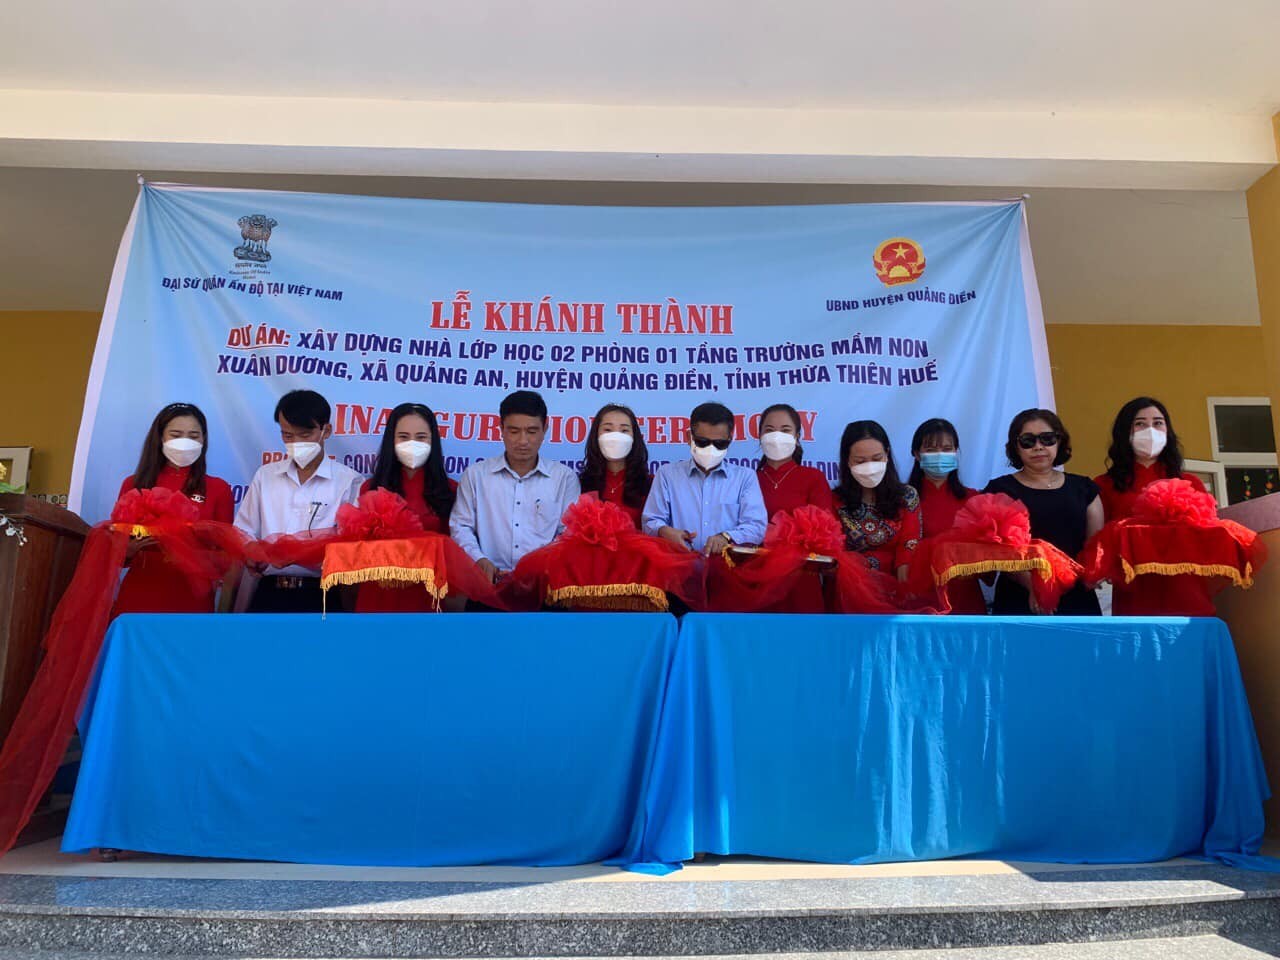 Thua Thien Hue and India Work to Find Potential Cooperation Opportunities